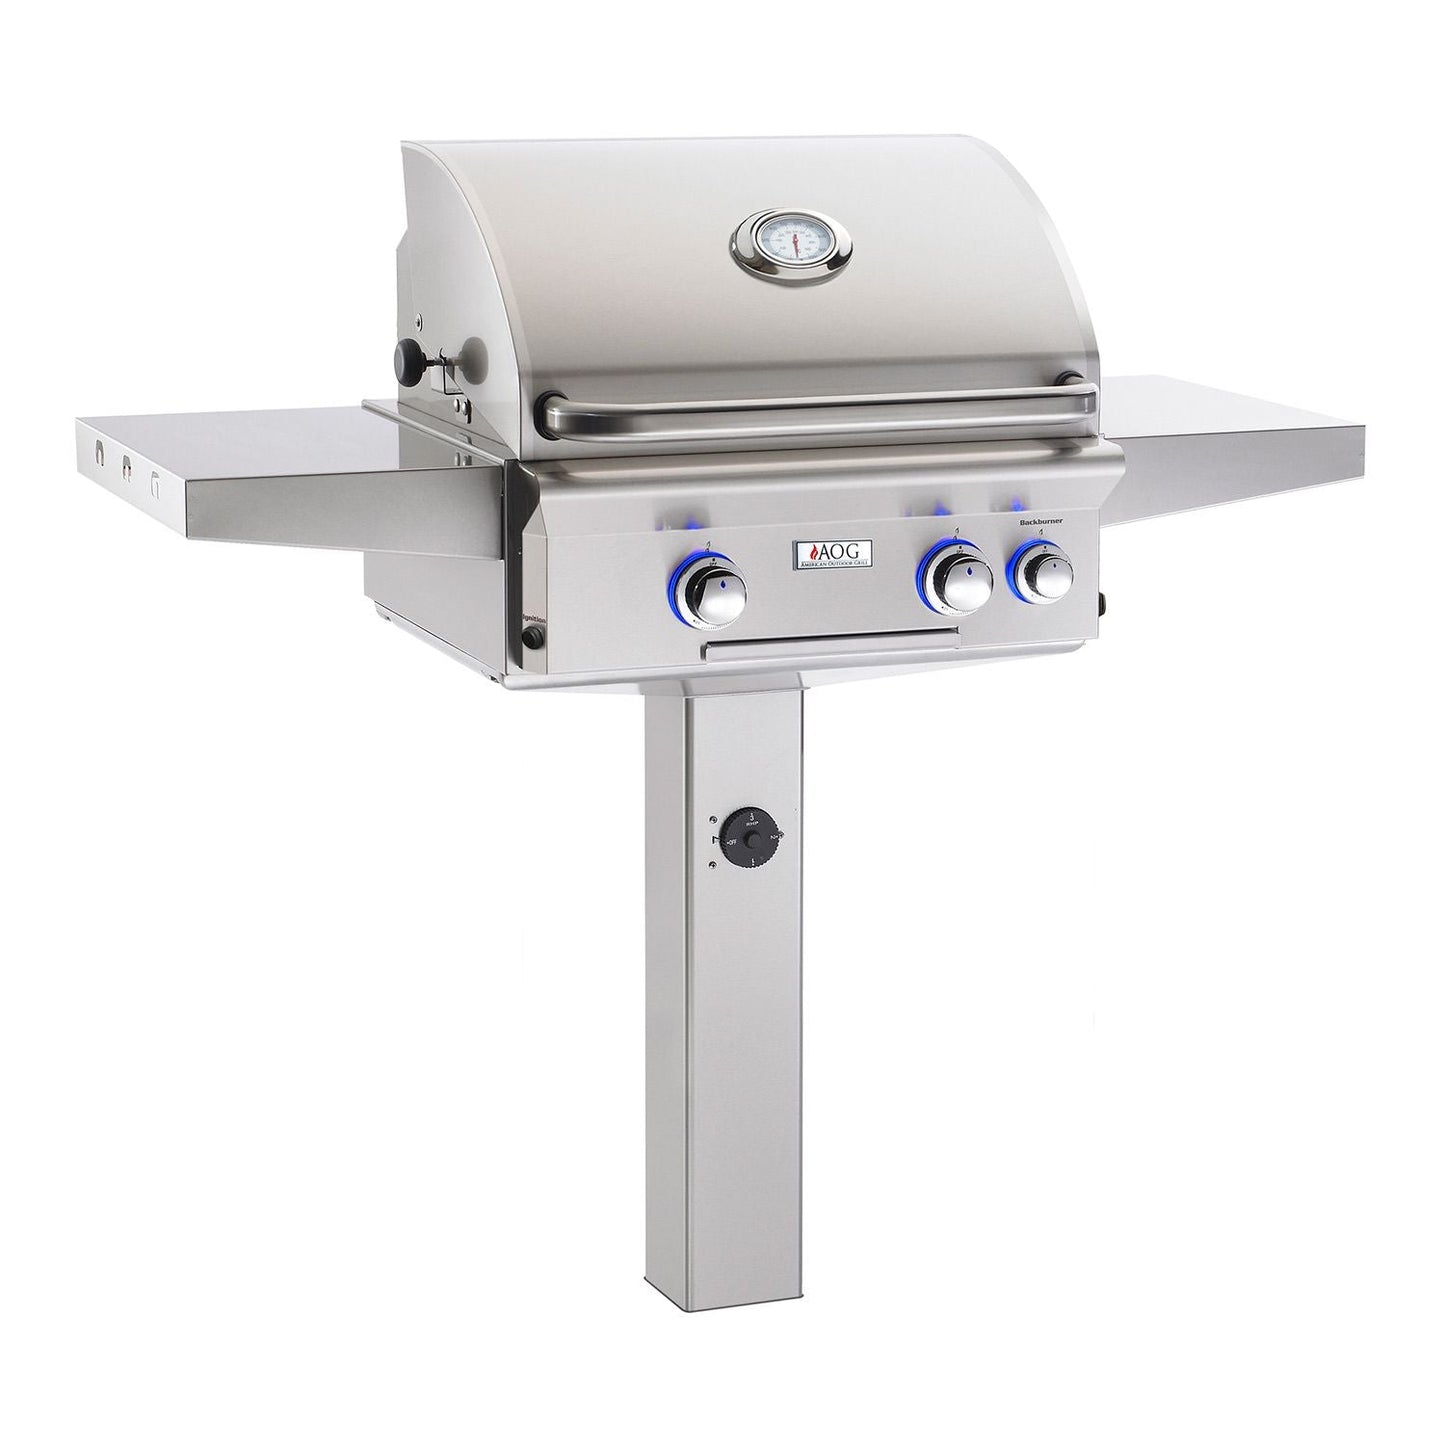 American Outdoor Grill 24" L Series Ground Post Grill AOG 24NGL